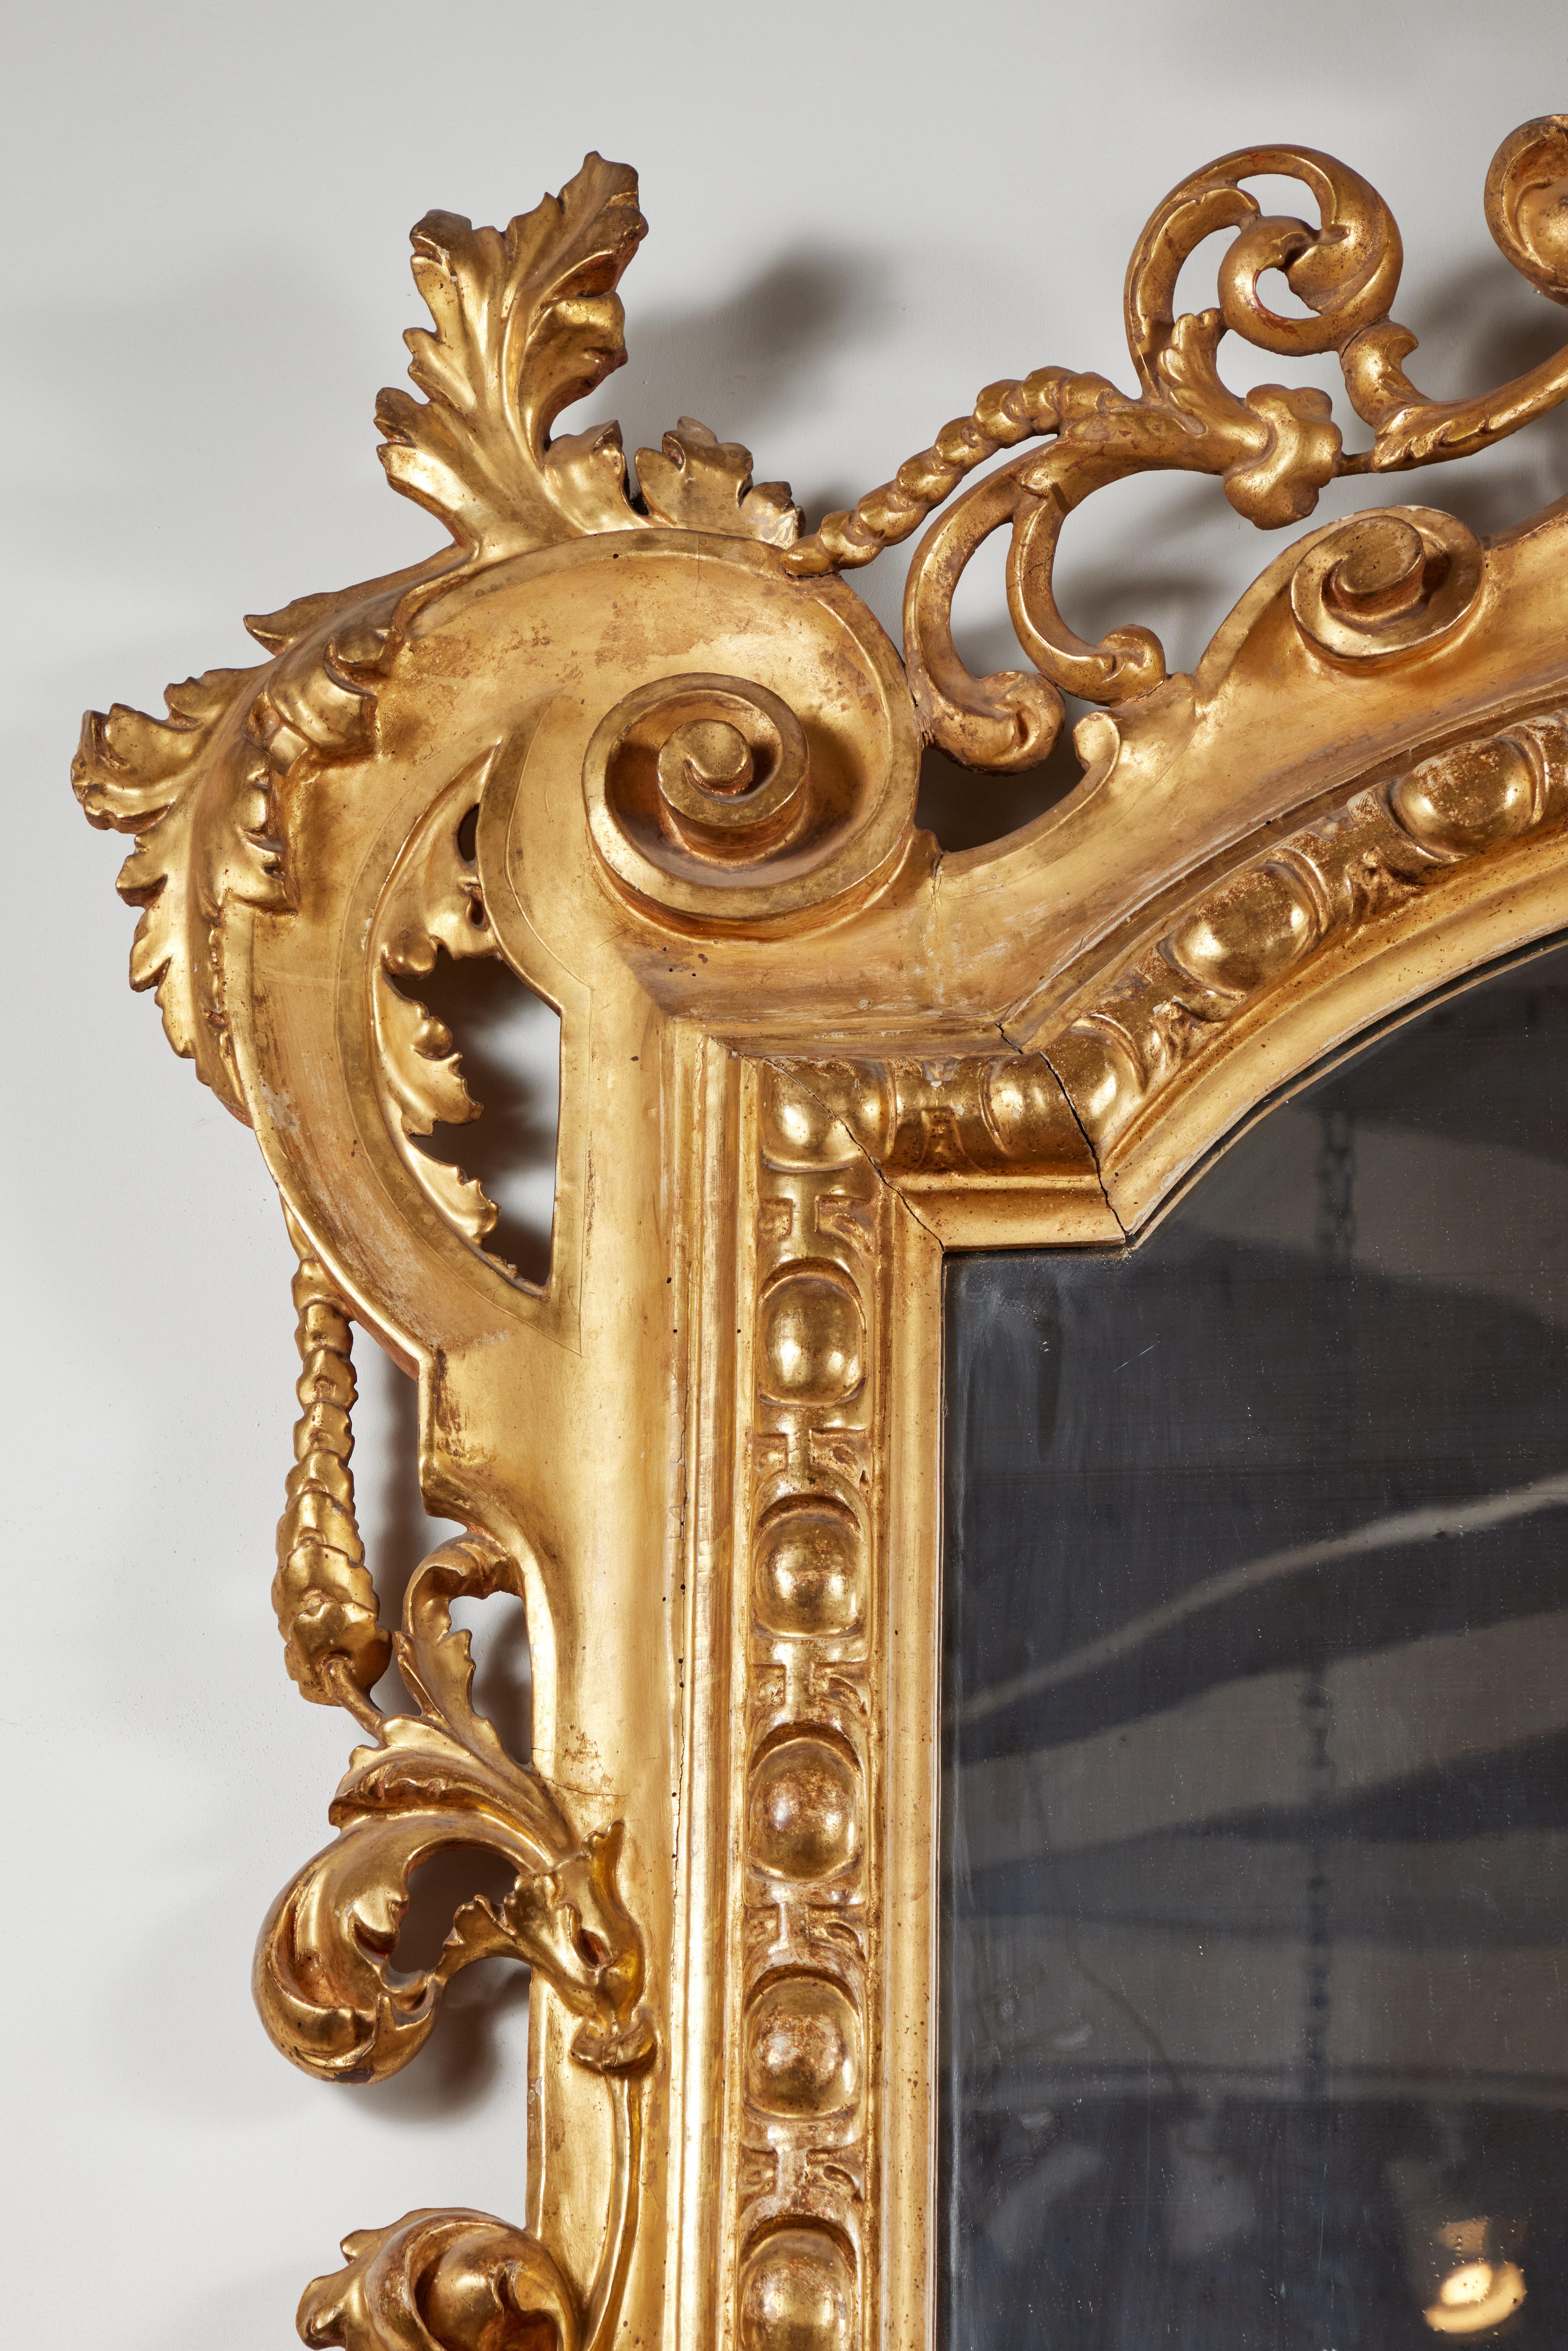 A grand-scale, c. 1850, hand-carved gessoed, and 22k gold gilded, mirror from central Italy. The richly carved body is embellished with foliate scrolls, and clusters of blooms throughout, and rises to a pierced crown with a forward thrusting